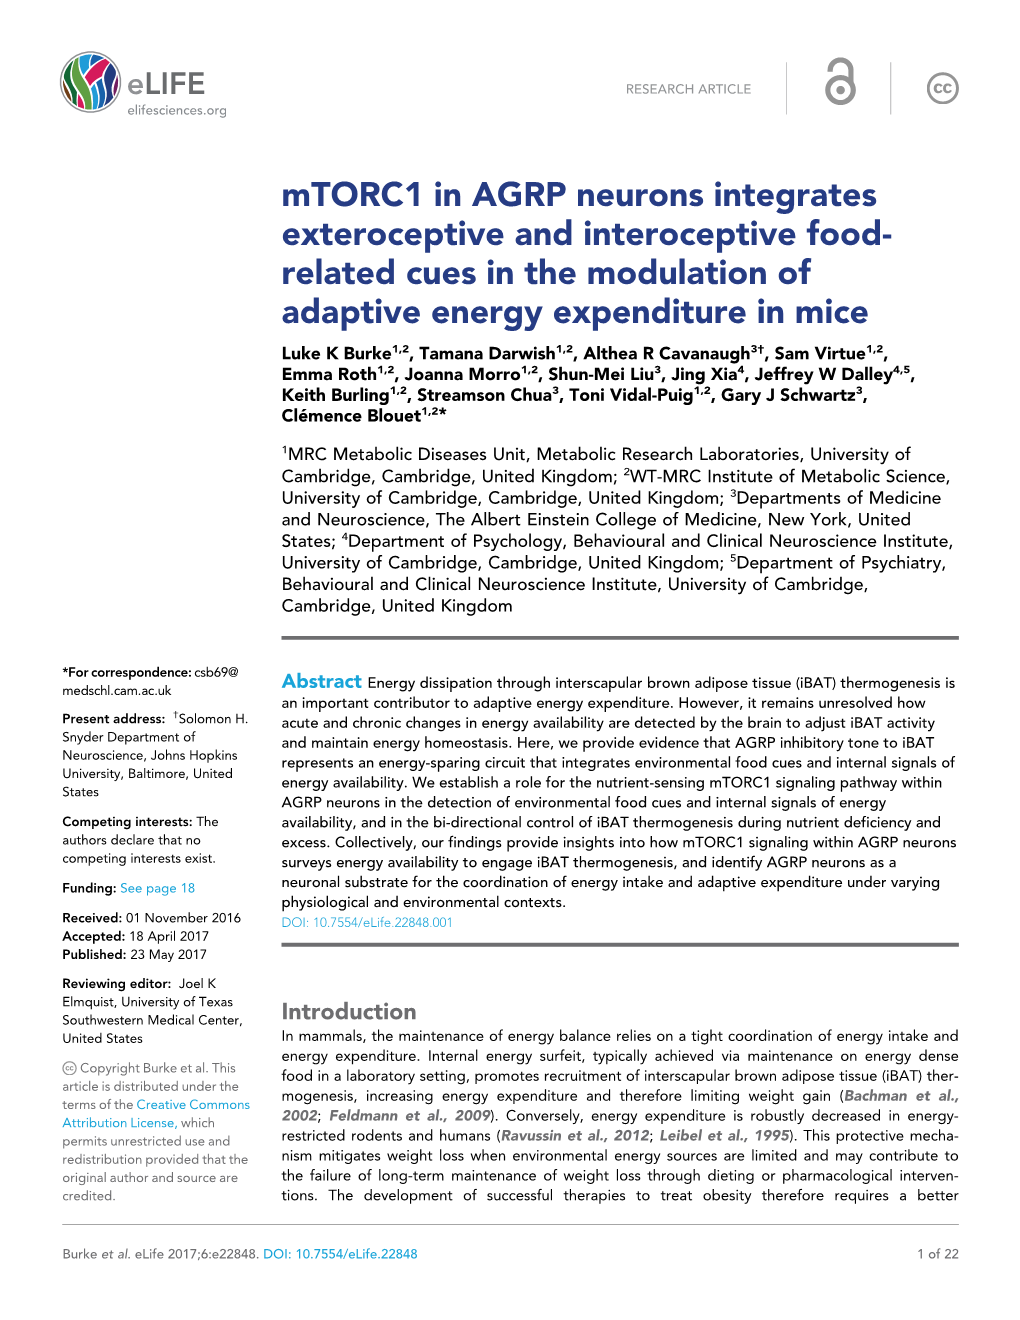 Mtorc1 in AGRP Neurons Integrates Exteroceptive and Interoceptive Food